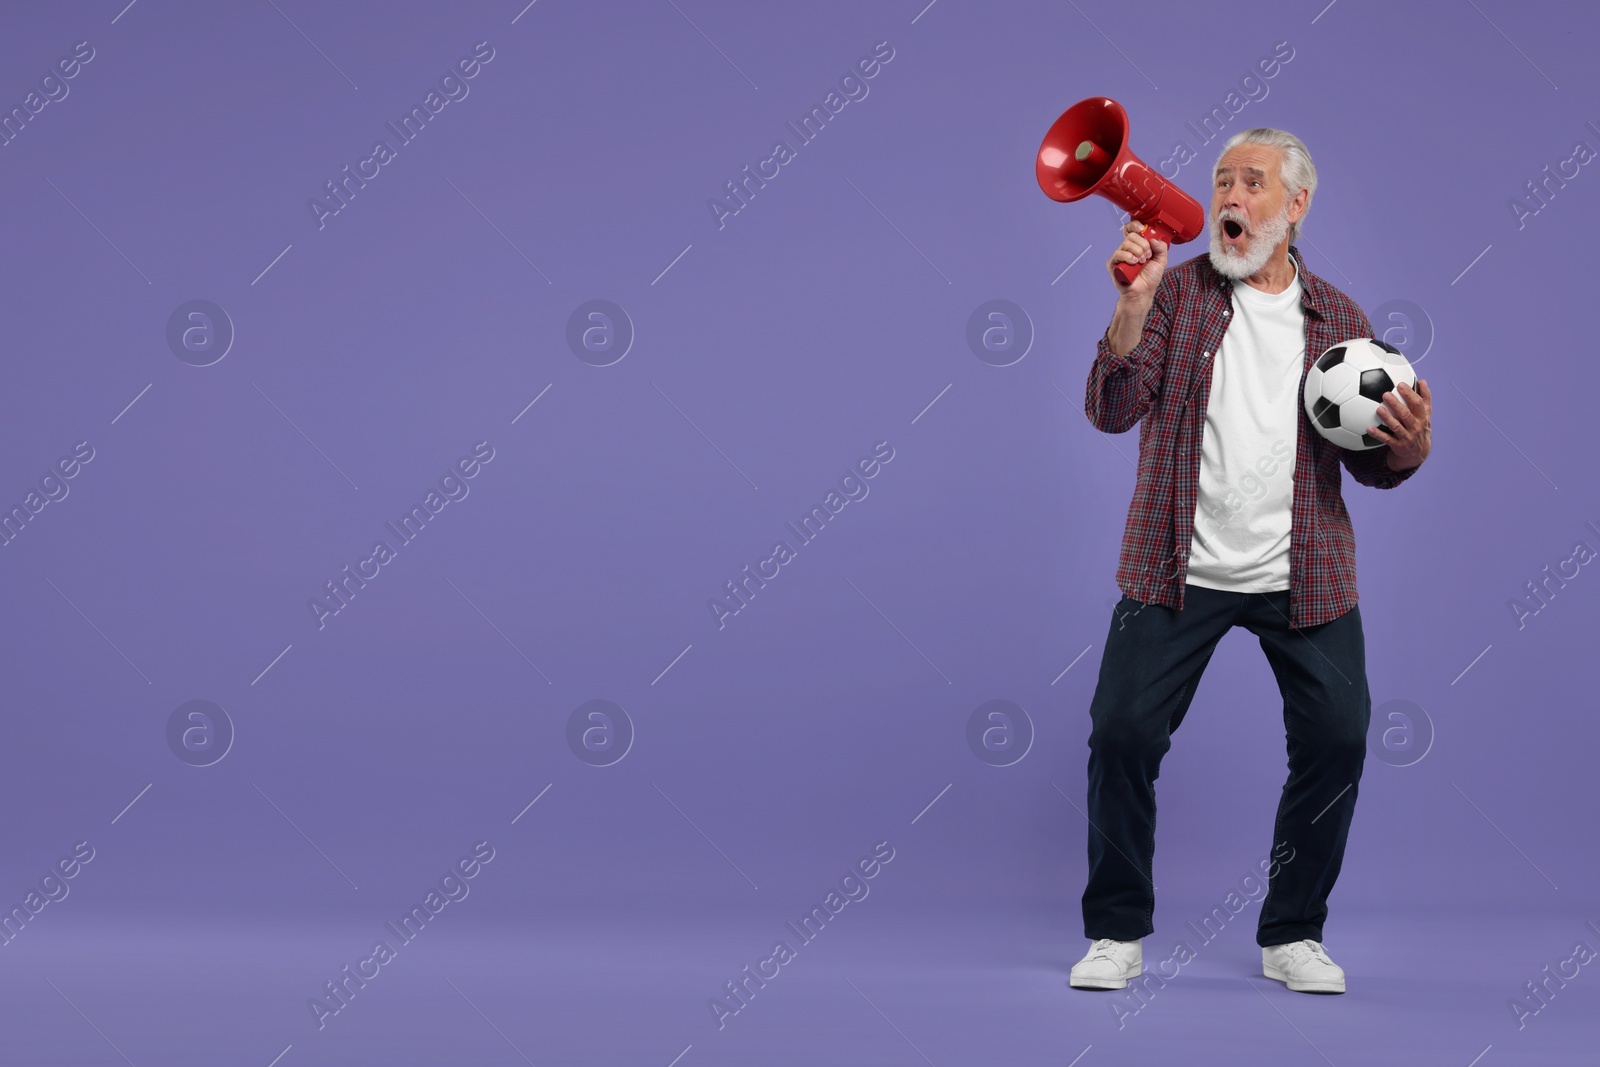 Photo of Emotional senior sports fan with soccer ball using megaphone on purple background, space for text